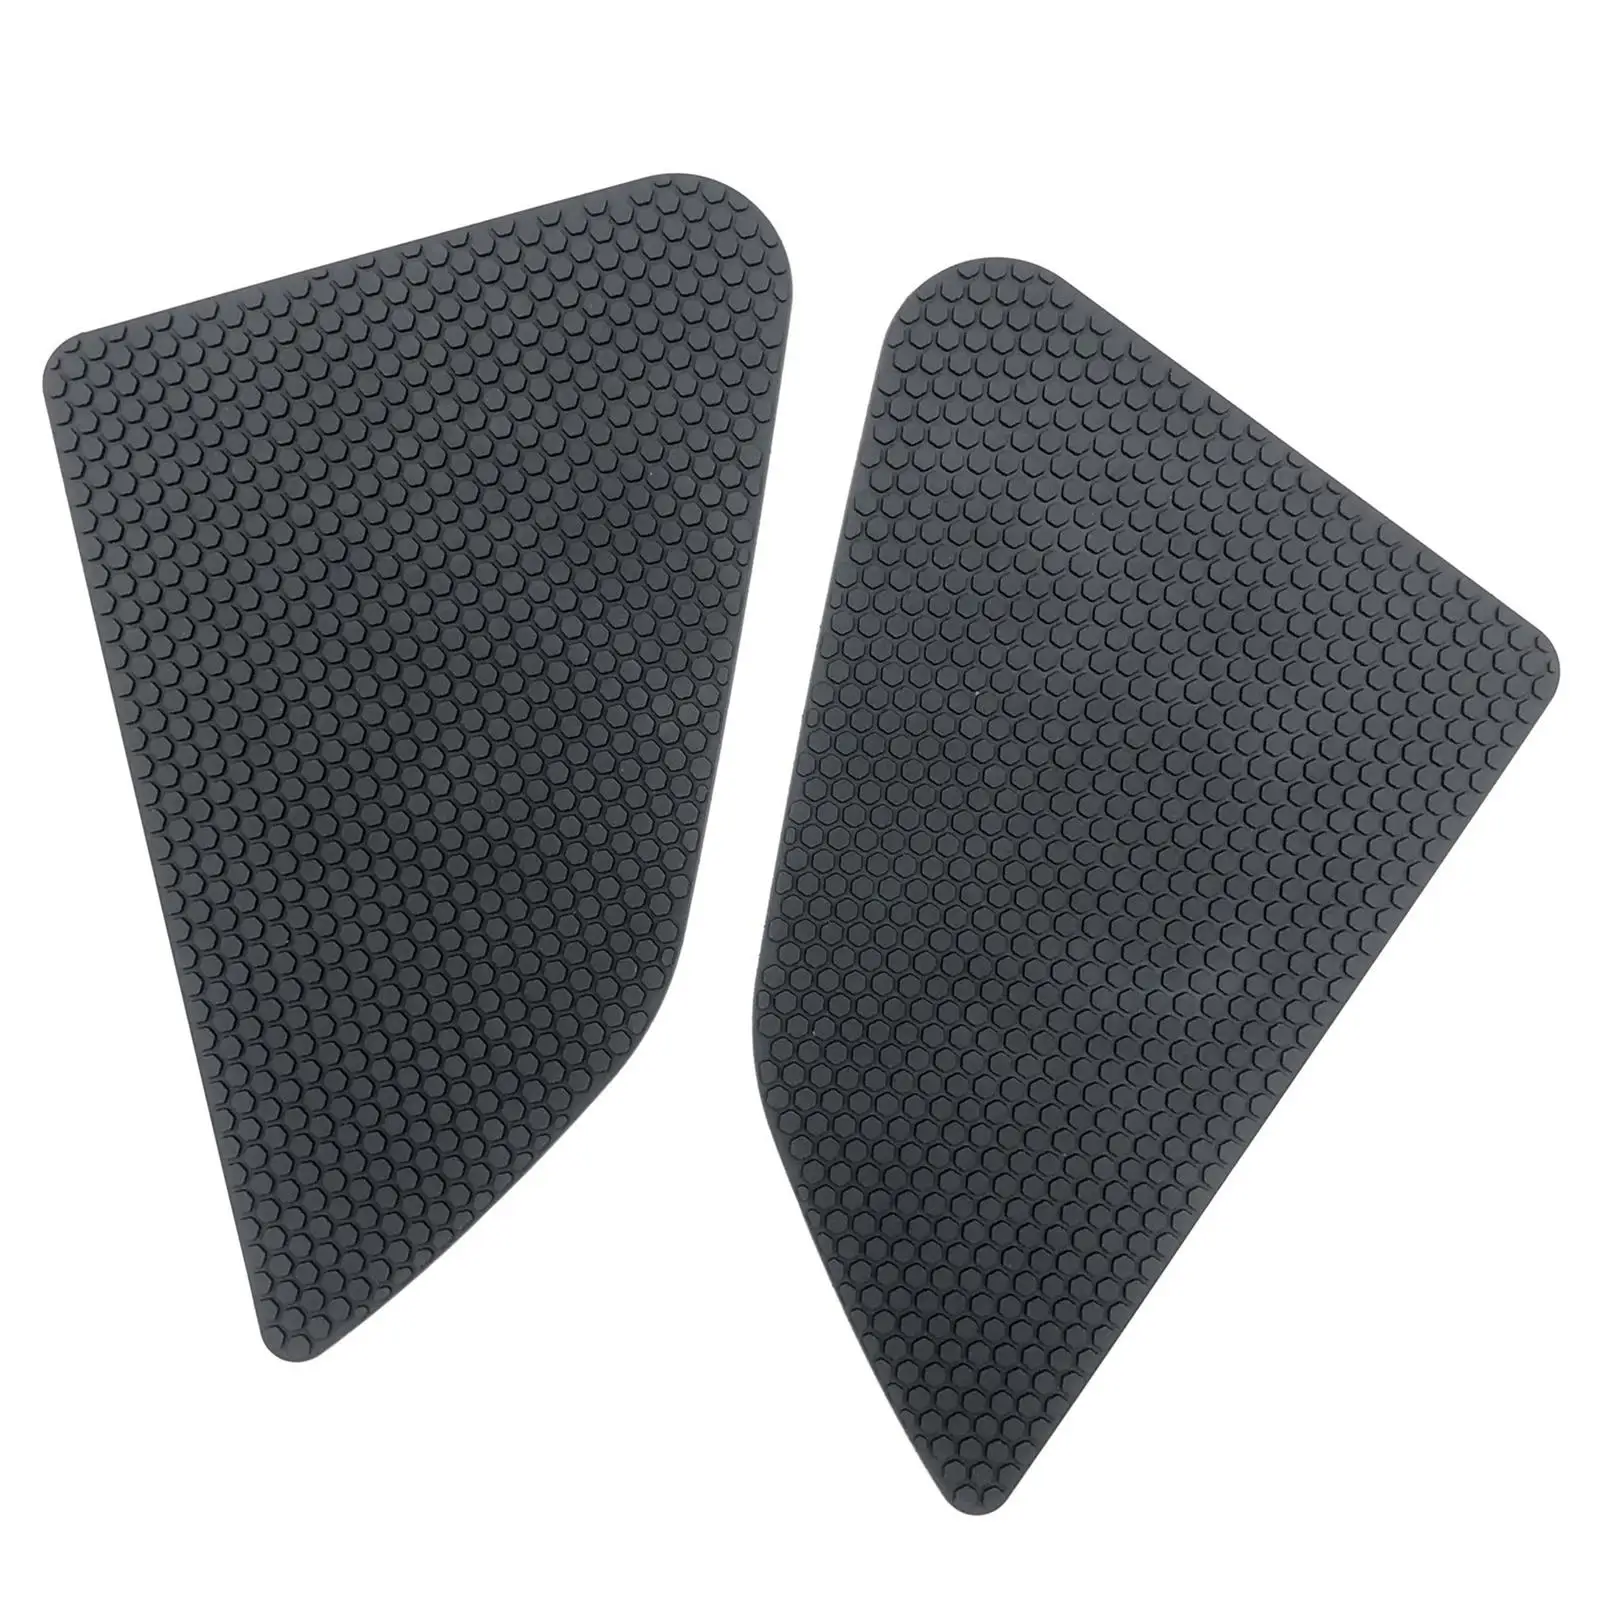 2Pcs Gas Tank Traction Side Pad Grip Decal for Ducati Desert x Durable